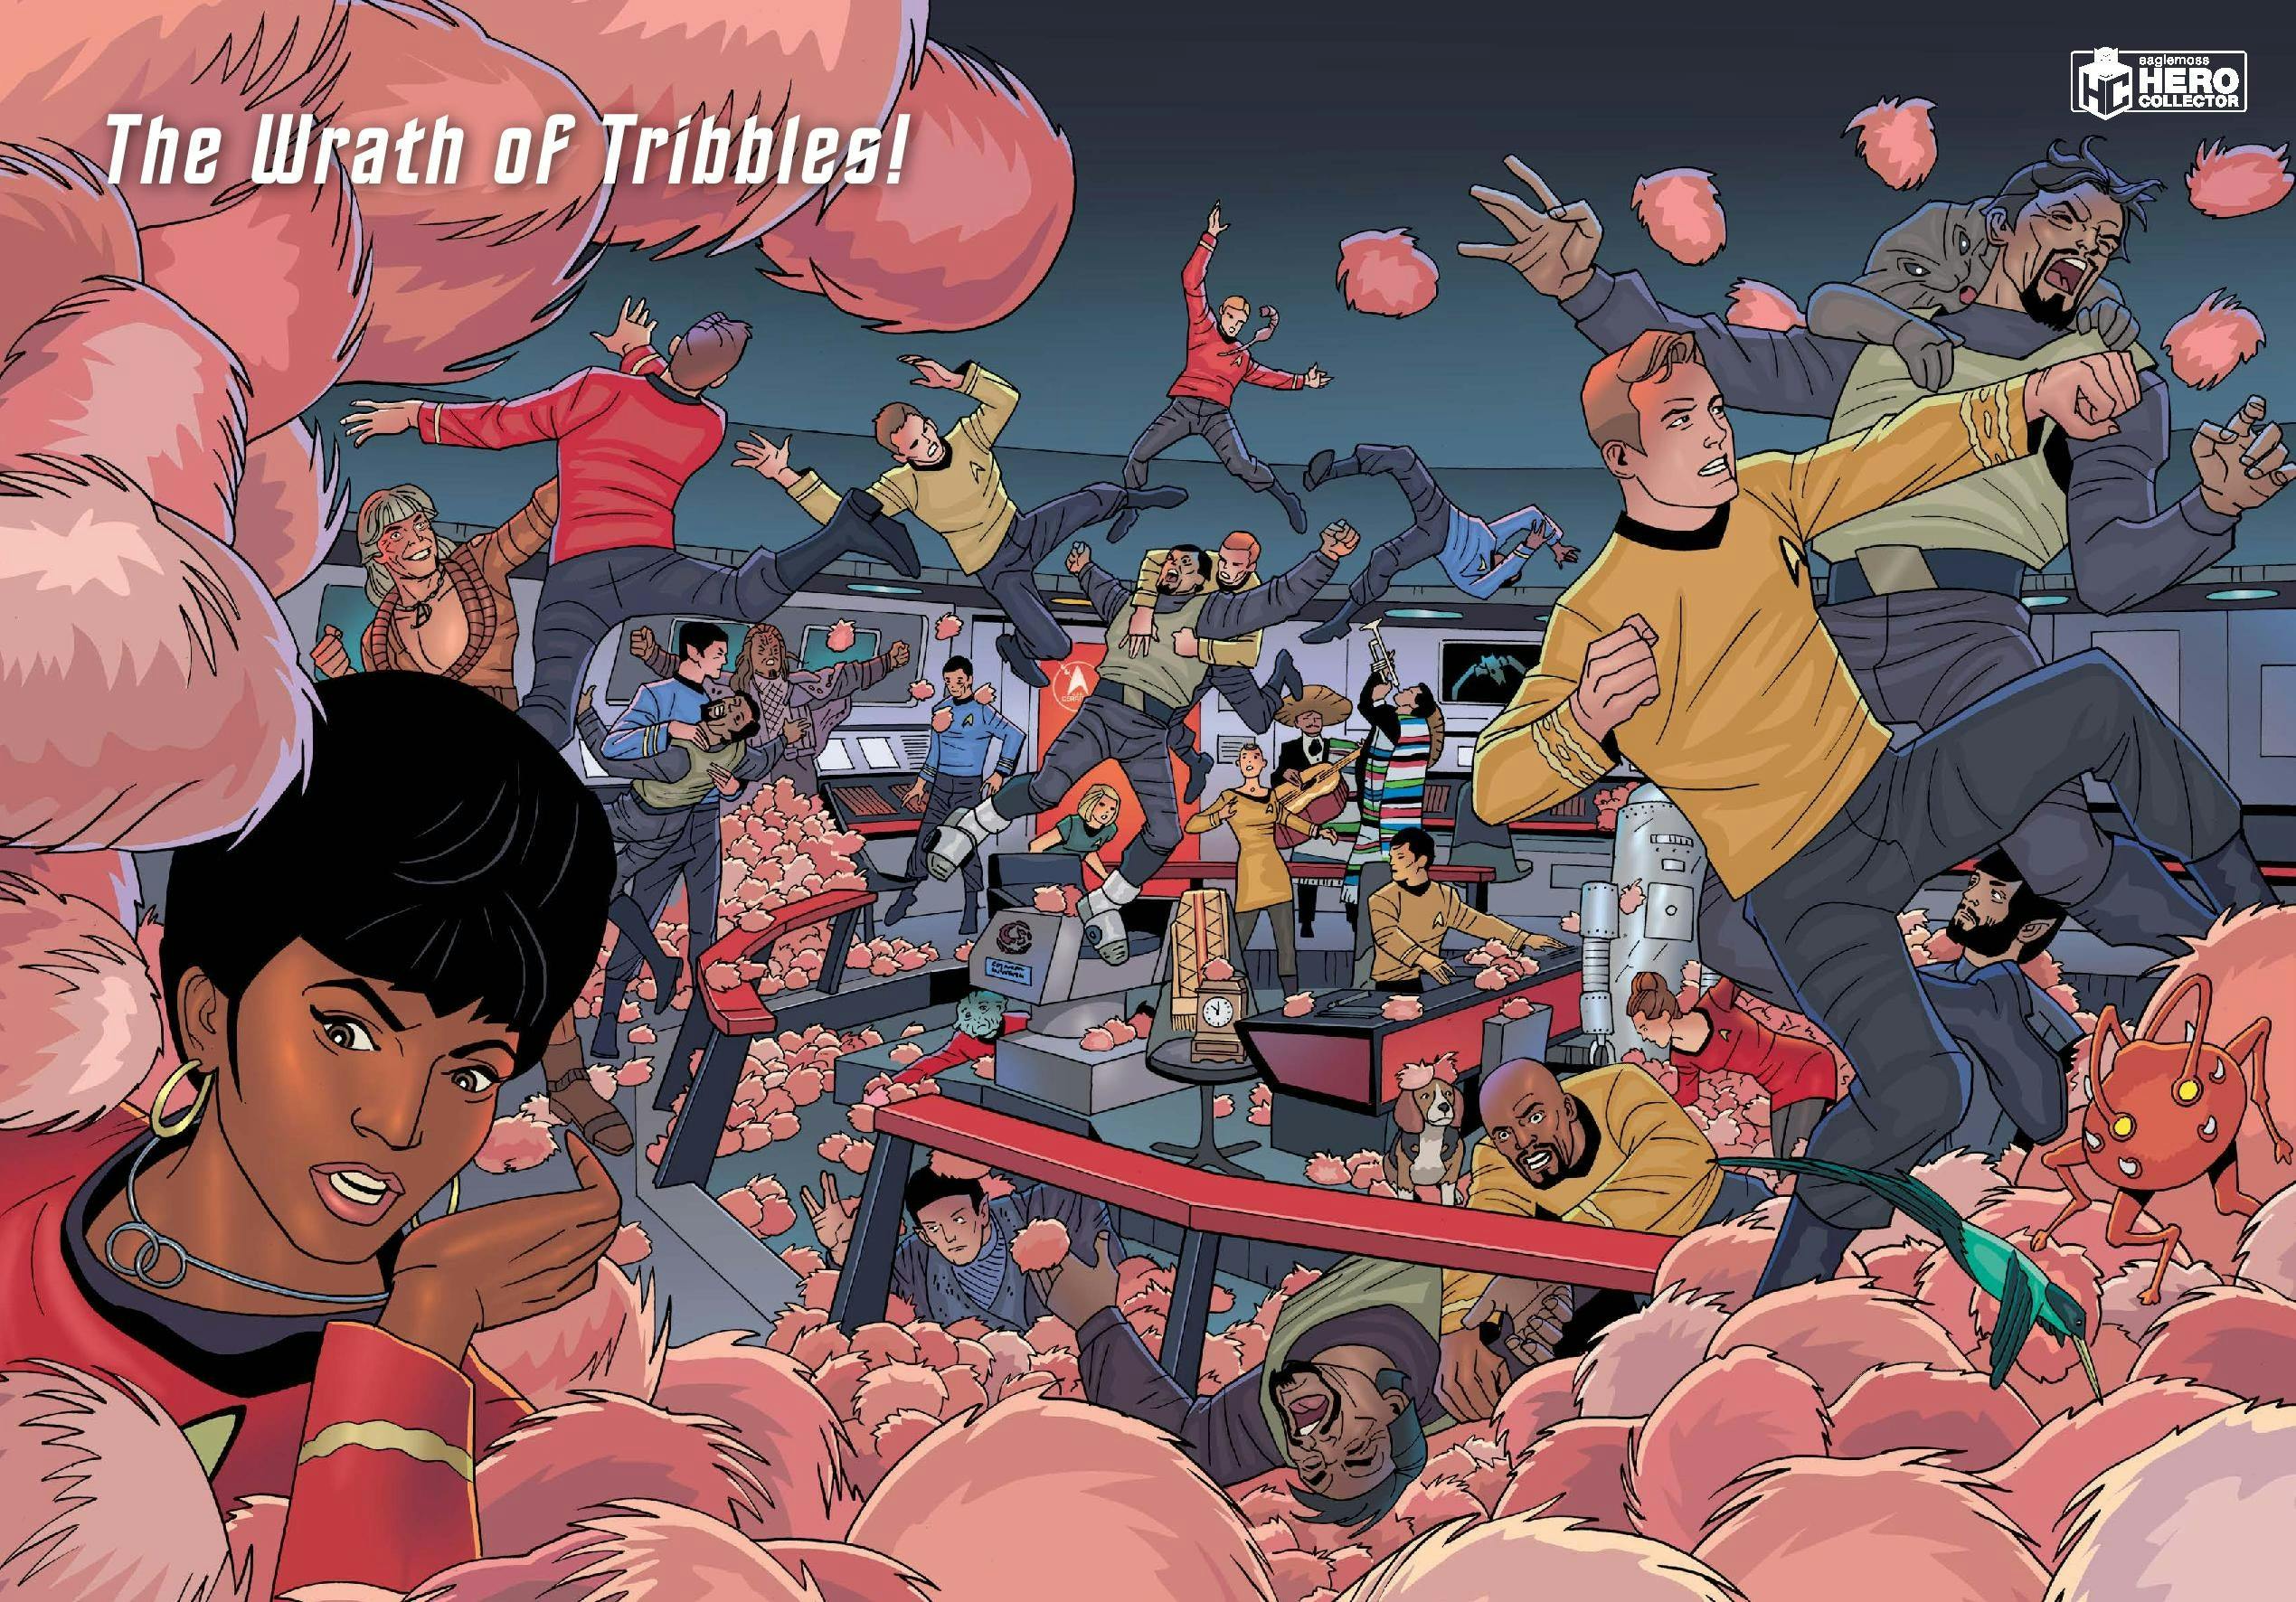 Star Trek Nerd Search - Quibbles with Tribbles